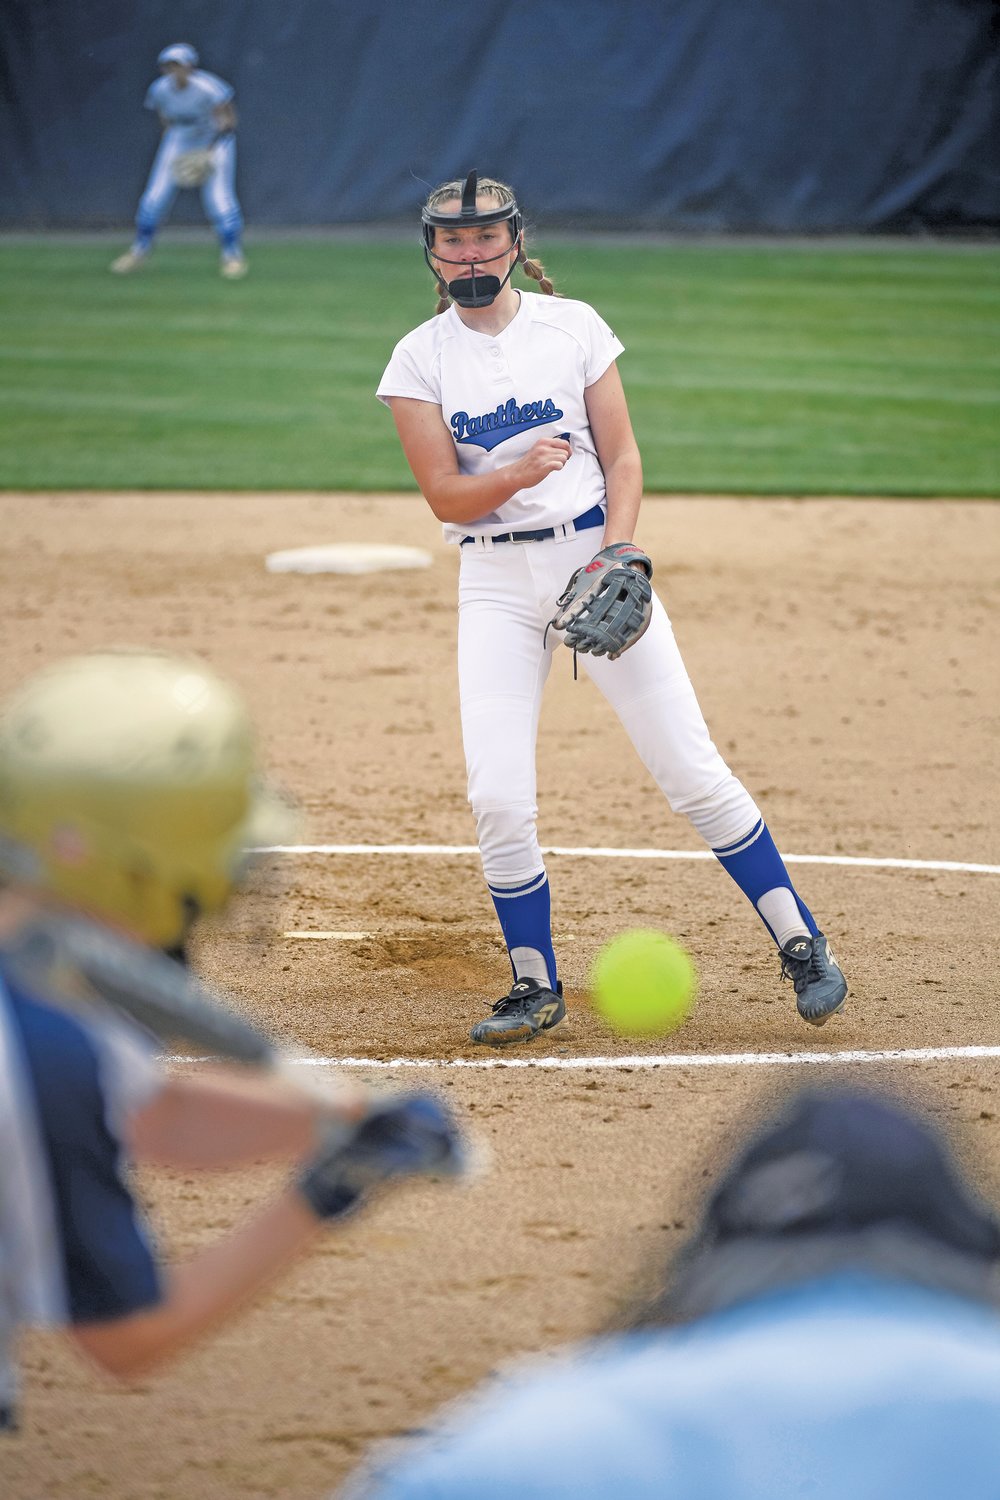 Quakertown’s Syd Andrews gave up only five hits in Spring-Ford’s 2-0 semifinal playoff victory.